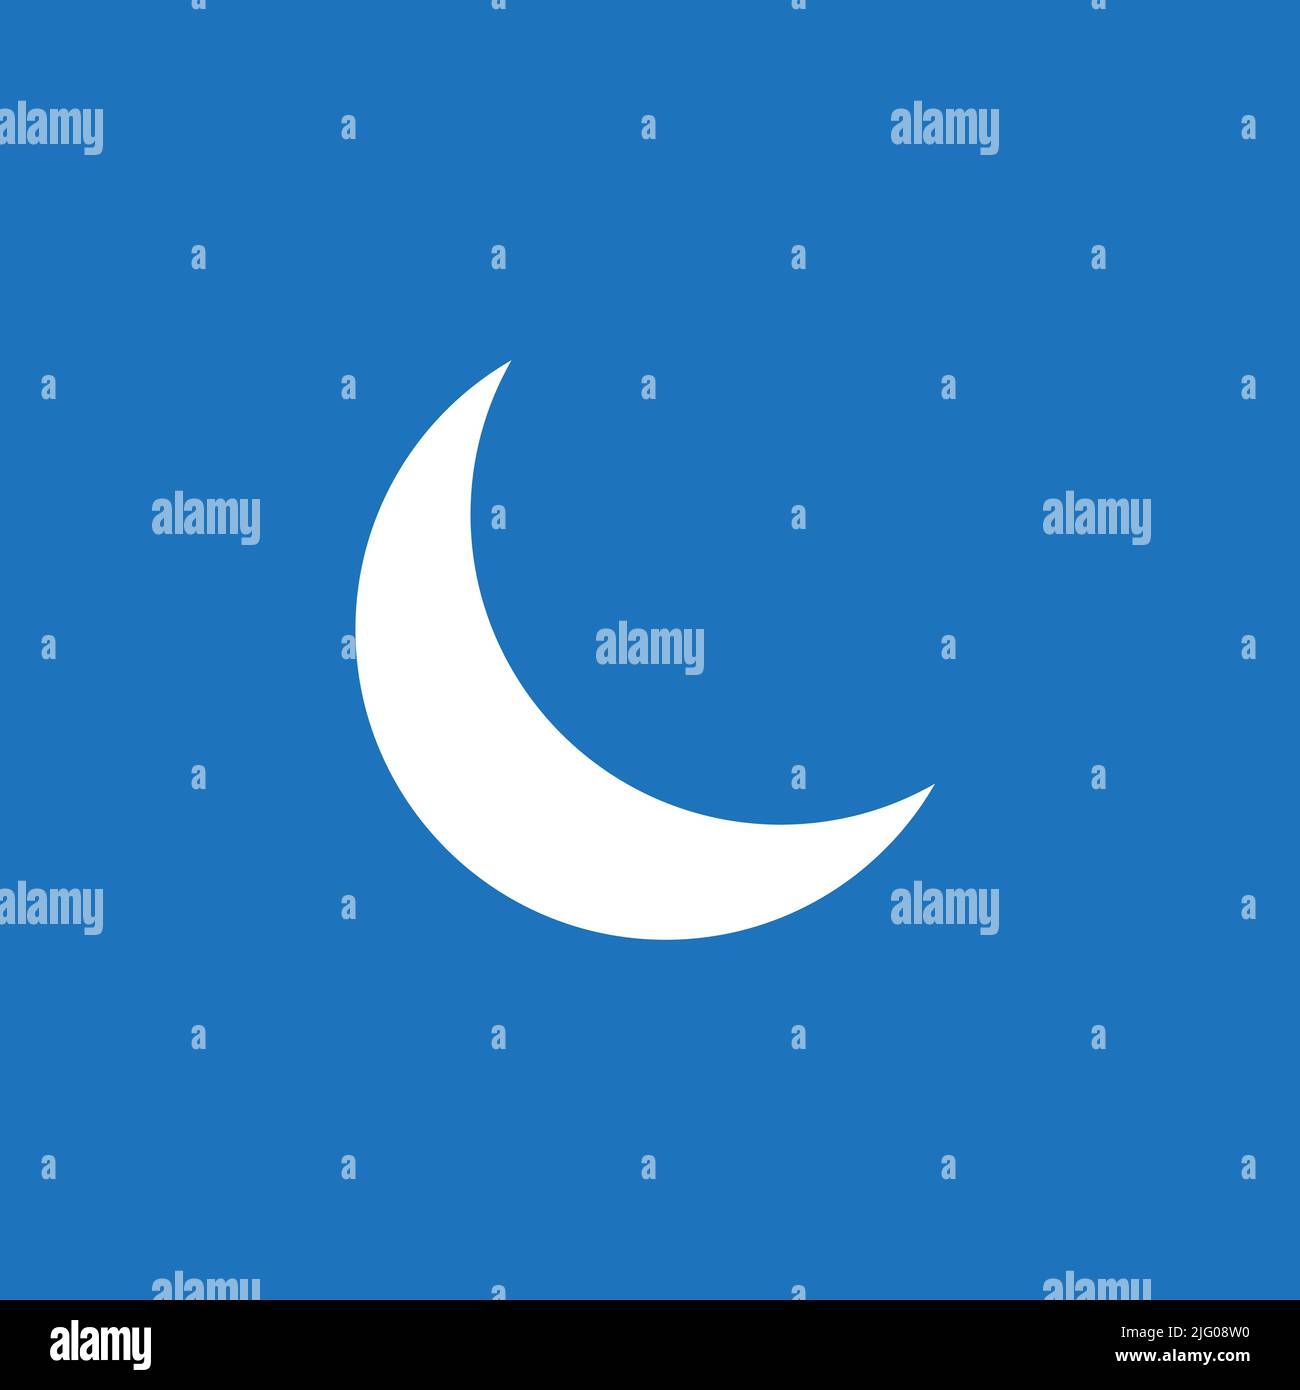 Design for celebrating international moon day, july 20th. vector Stock Vector